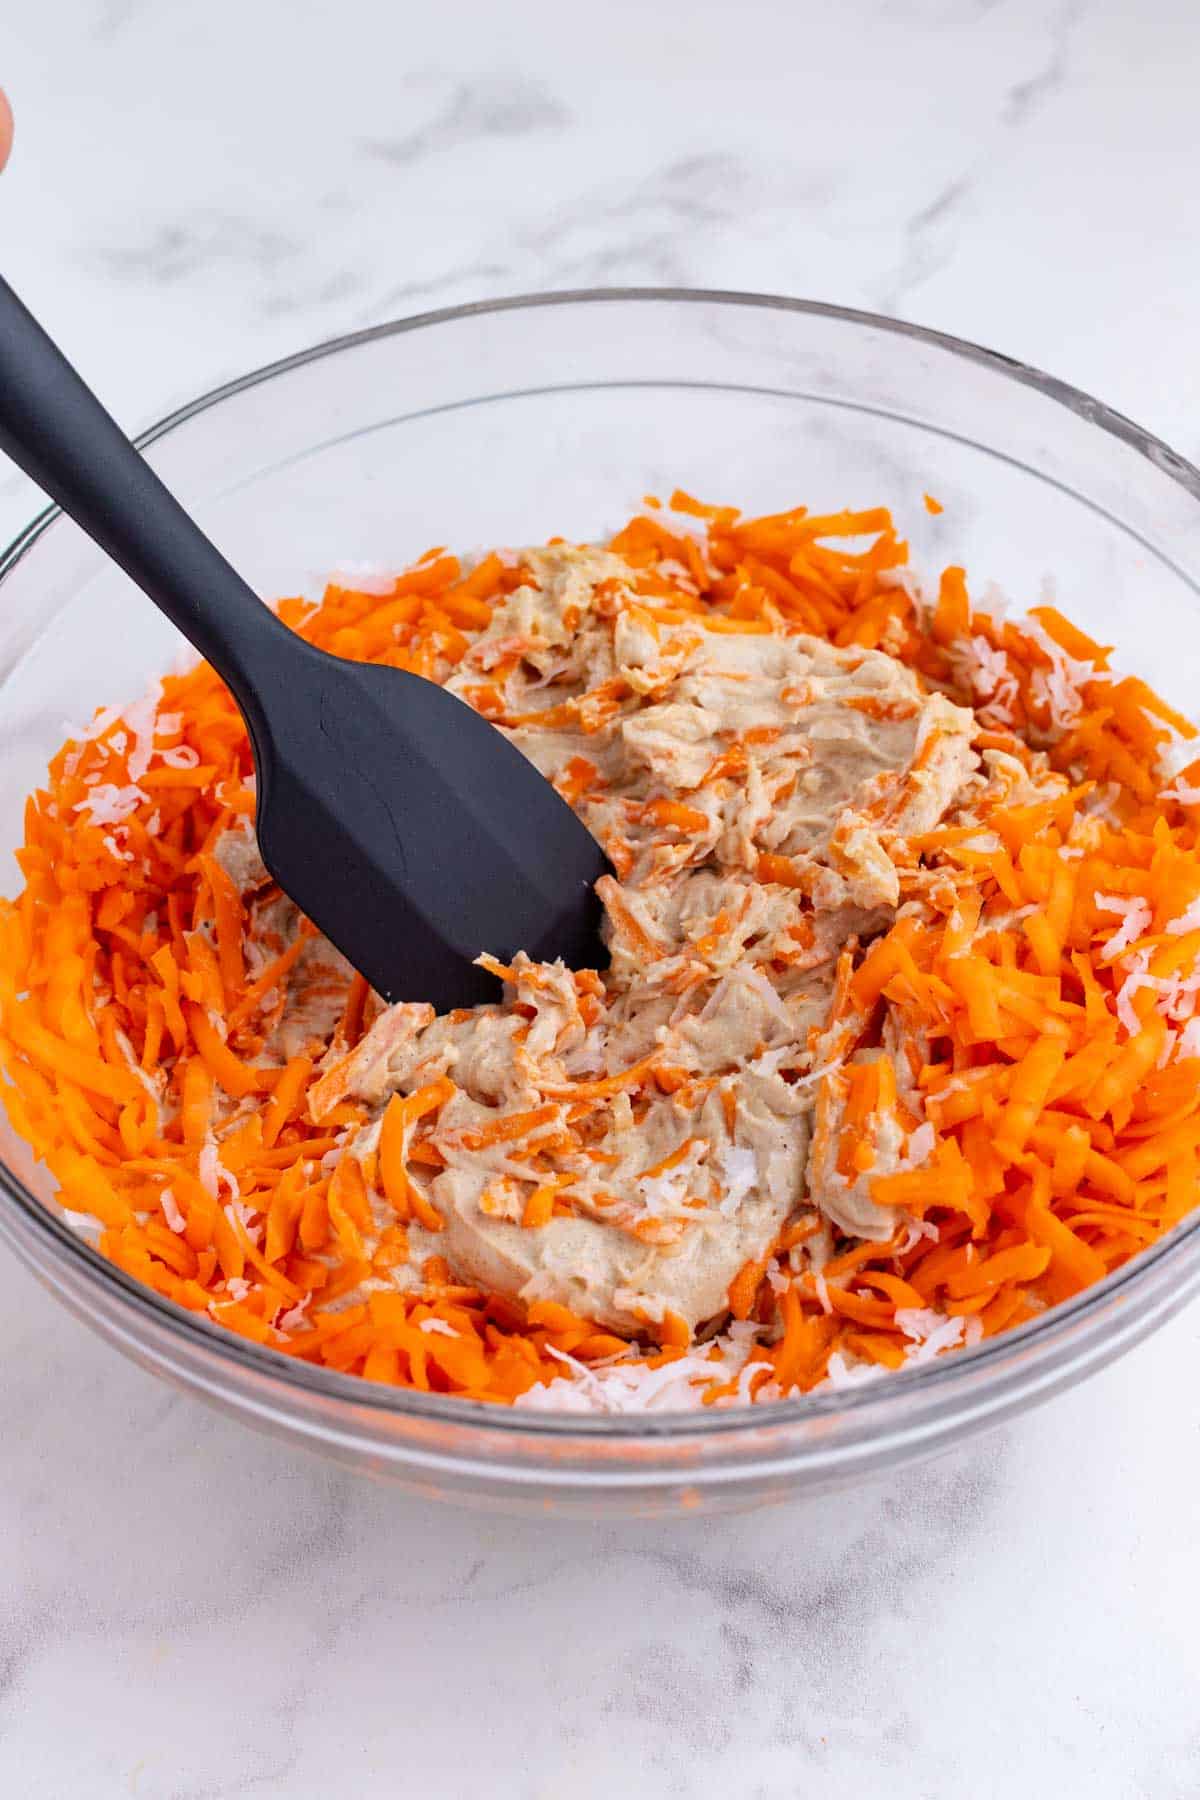 A spatula folds in the carrots and coconut.